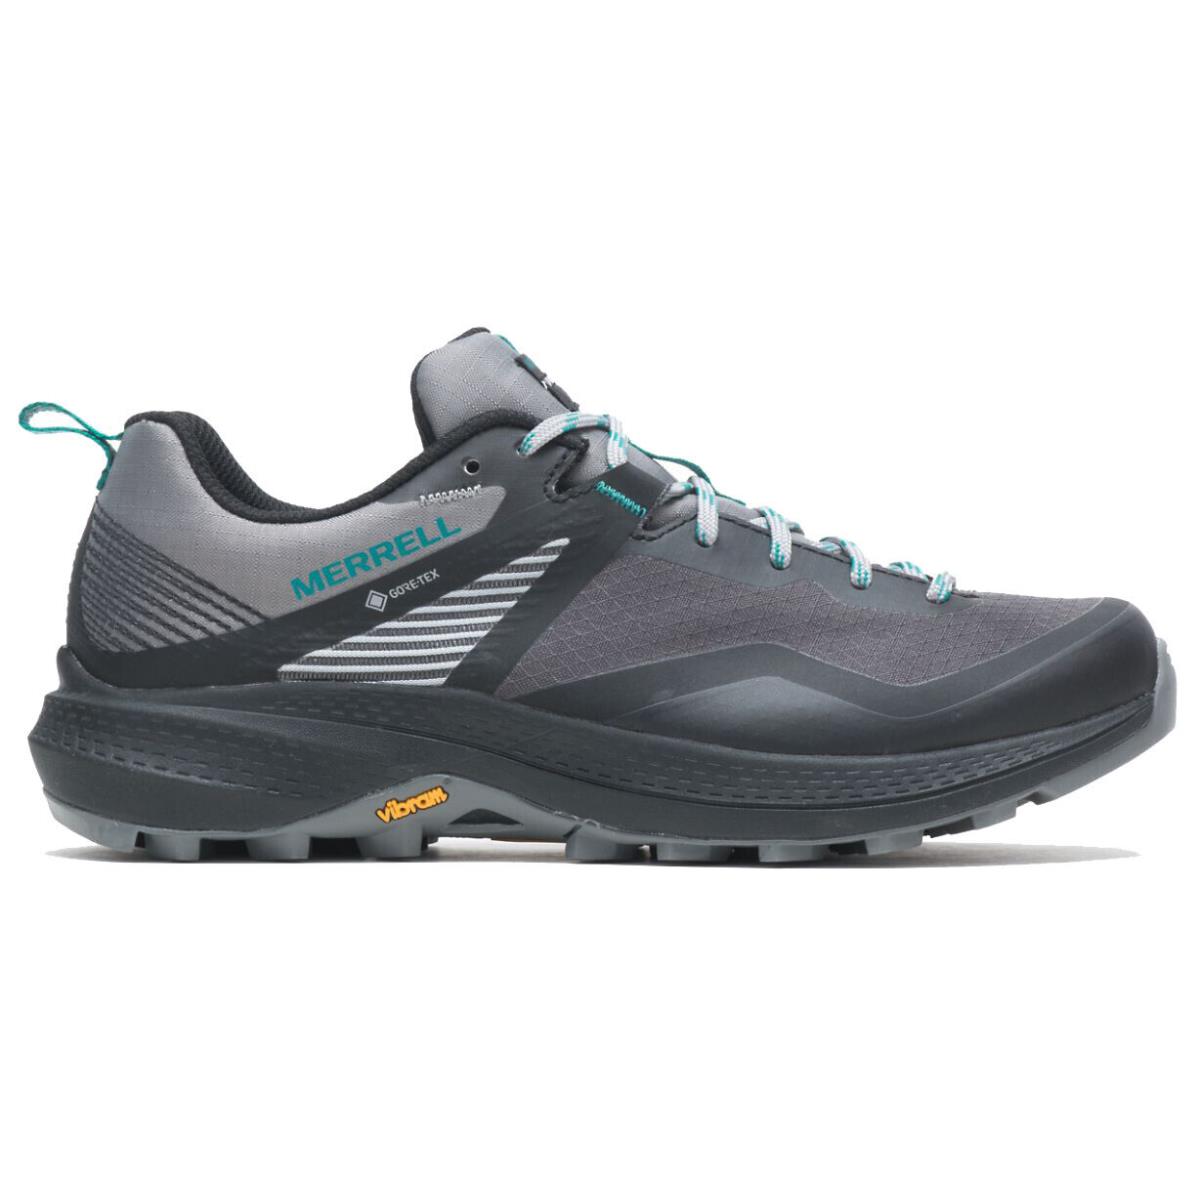 Merrell Women`s Waterproof Gore-tex Breathable Mesh Hiker Shoes Removable Insole CHARCOAL/TEAL